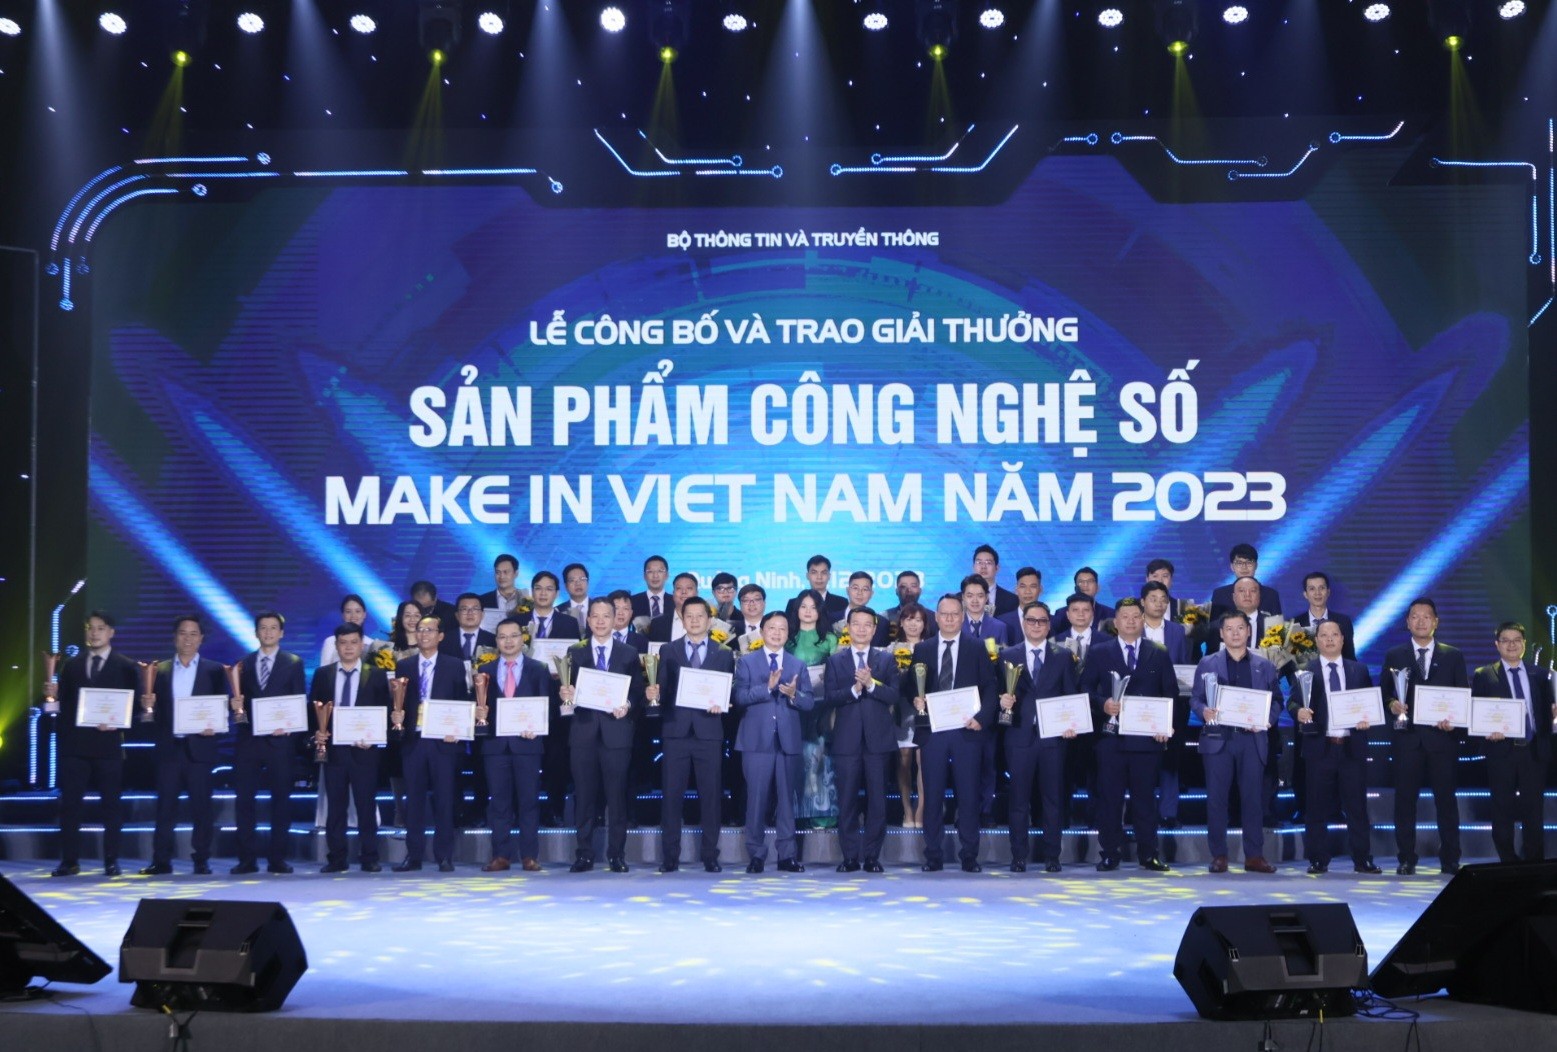 dien-dan-quoc-gia-phat-trien-doanh-nghiep-cong-nghe-so-pho-cap-cong-nghe-so-vao-cuoc-song-03-1702278756.jpeg